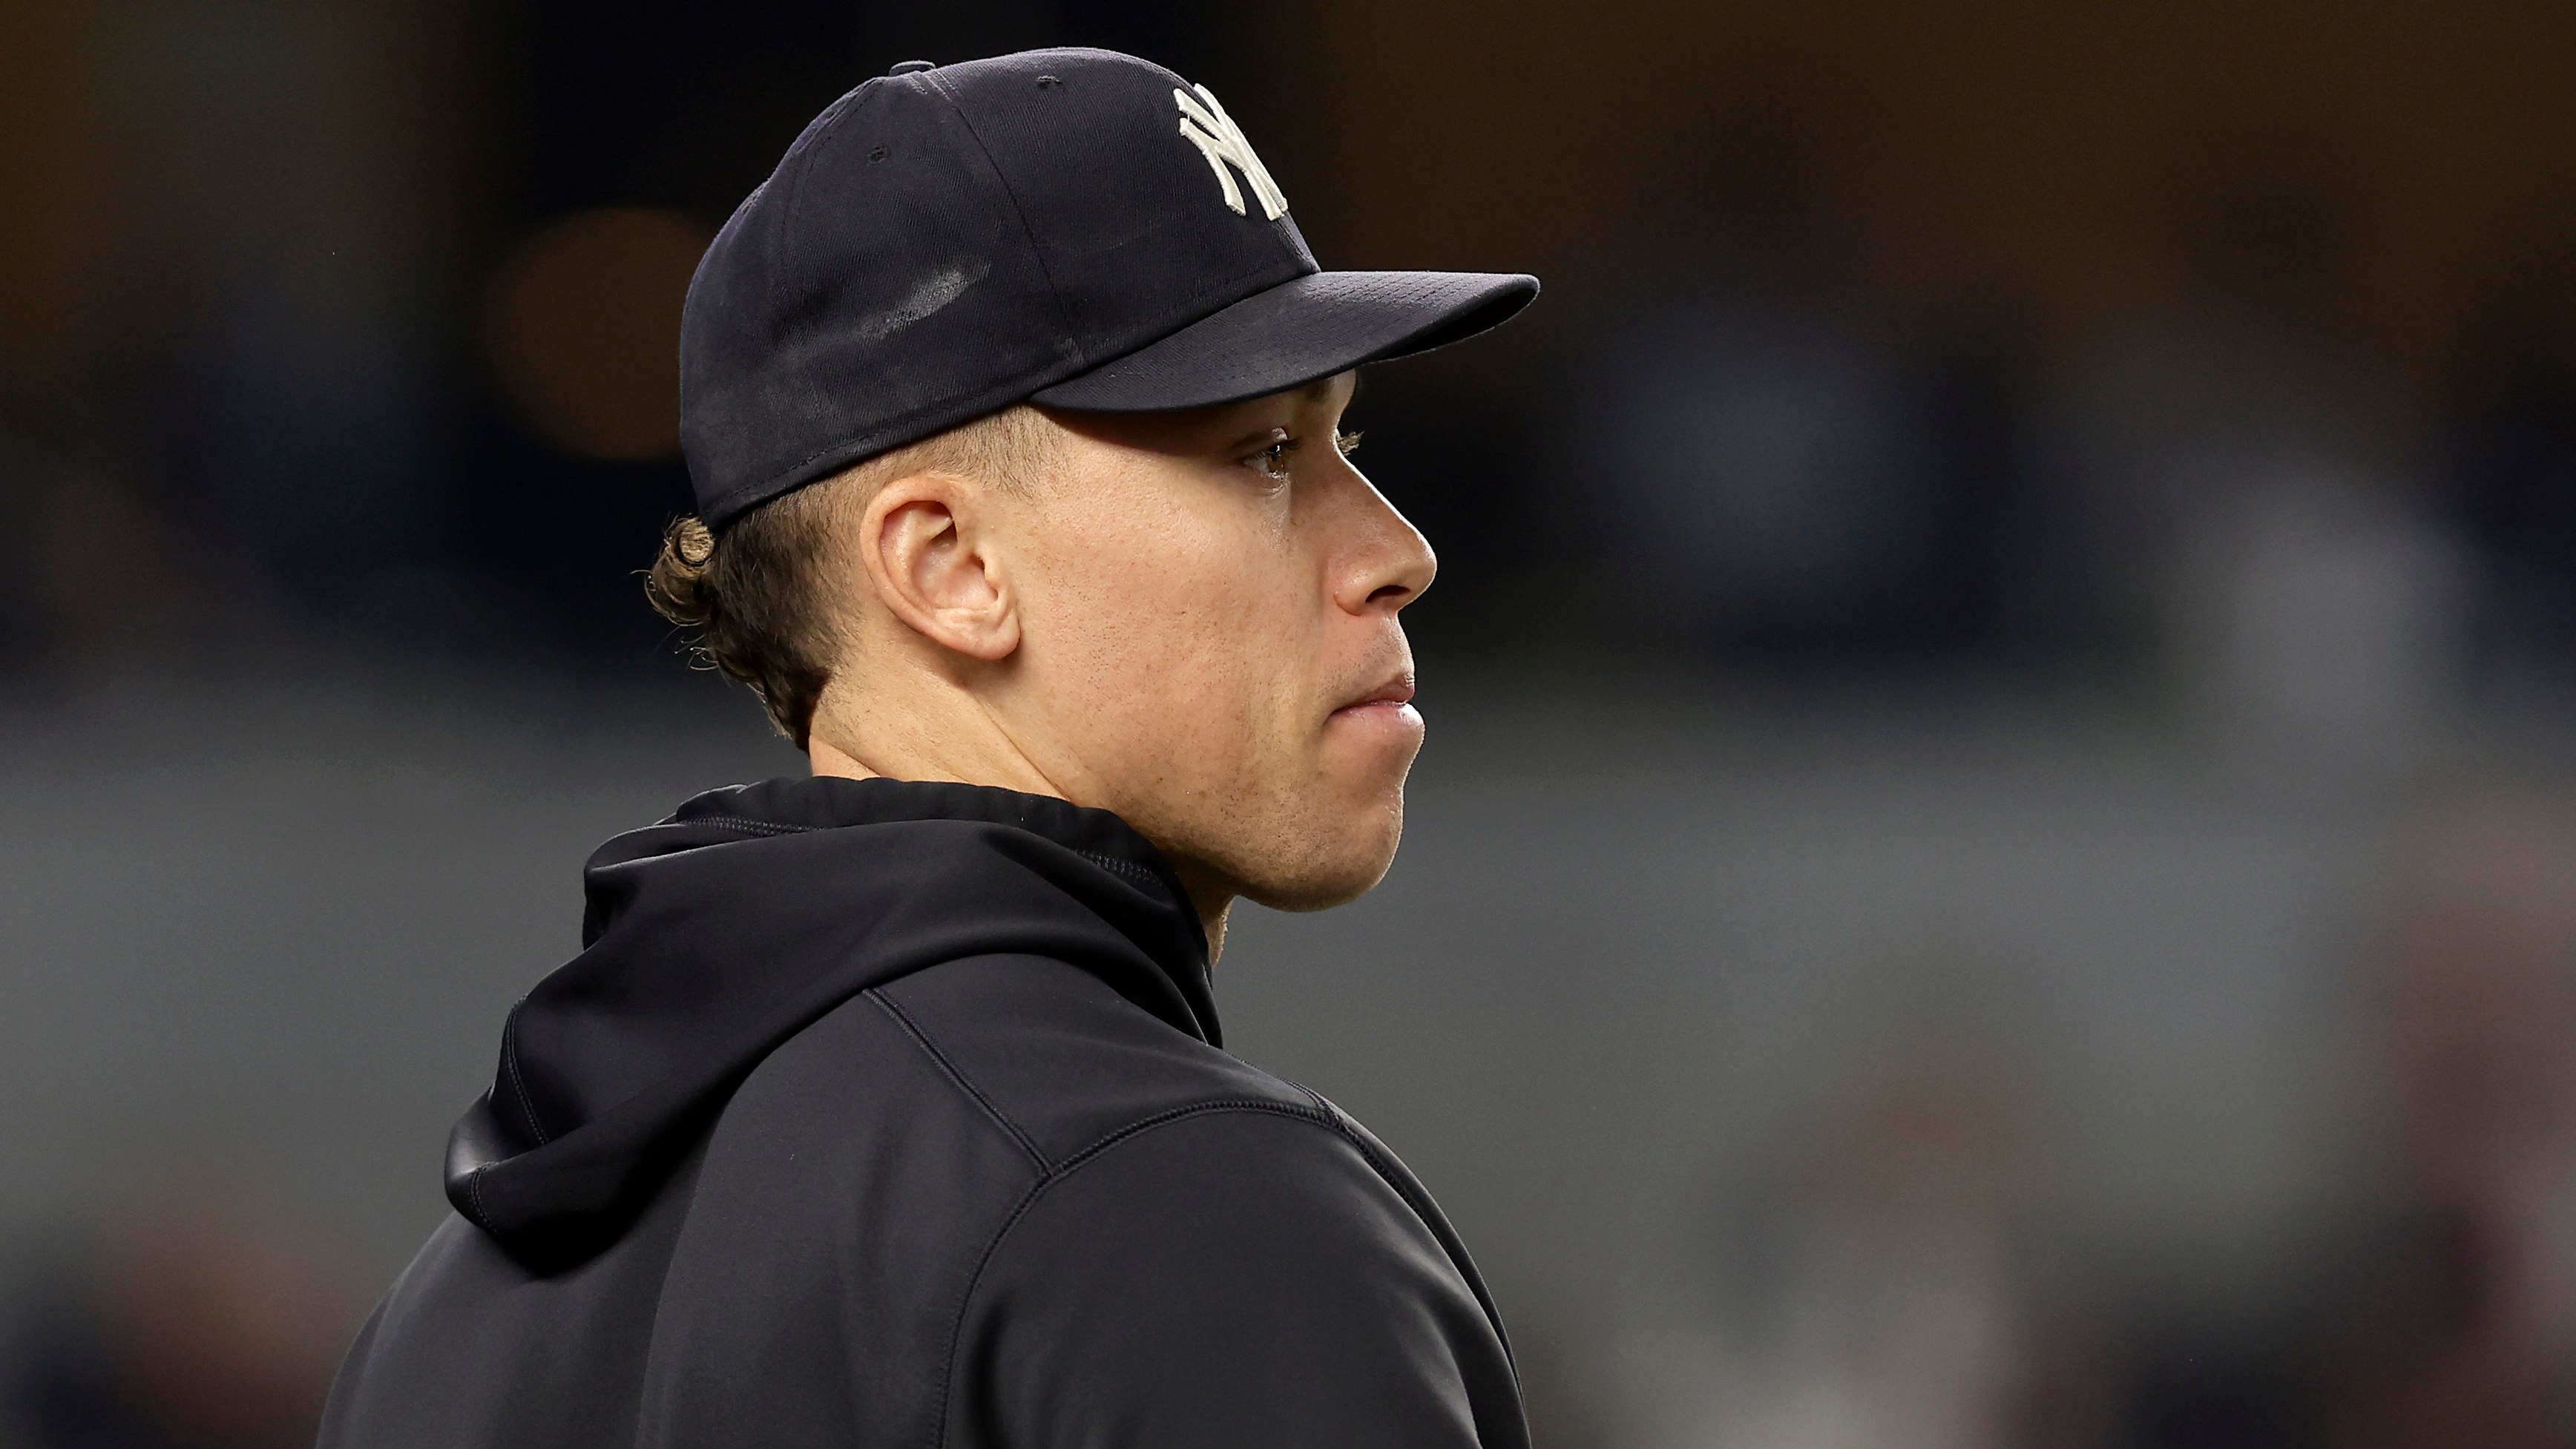 Yankees star Aaron Judge has torn ligament in toe, no timeline for